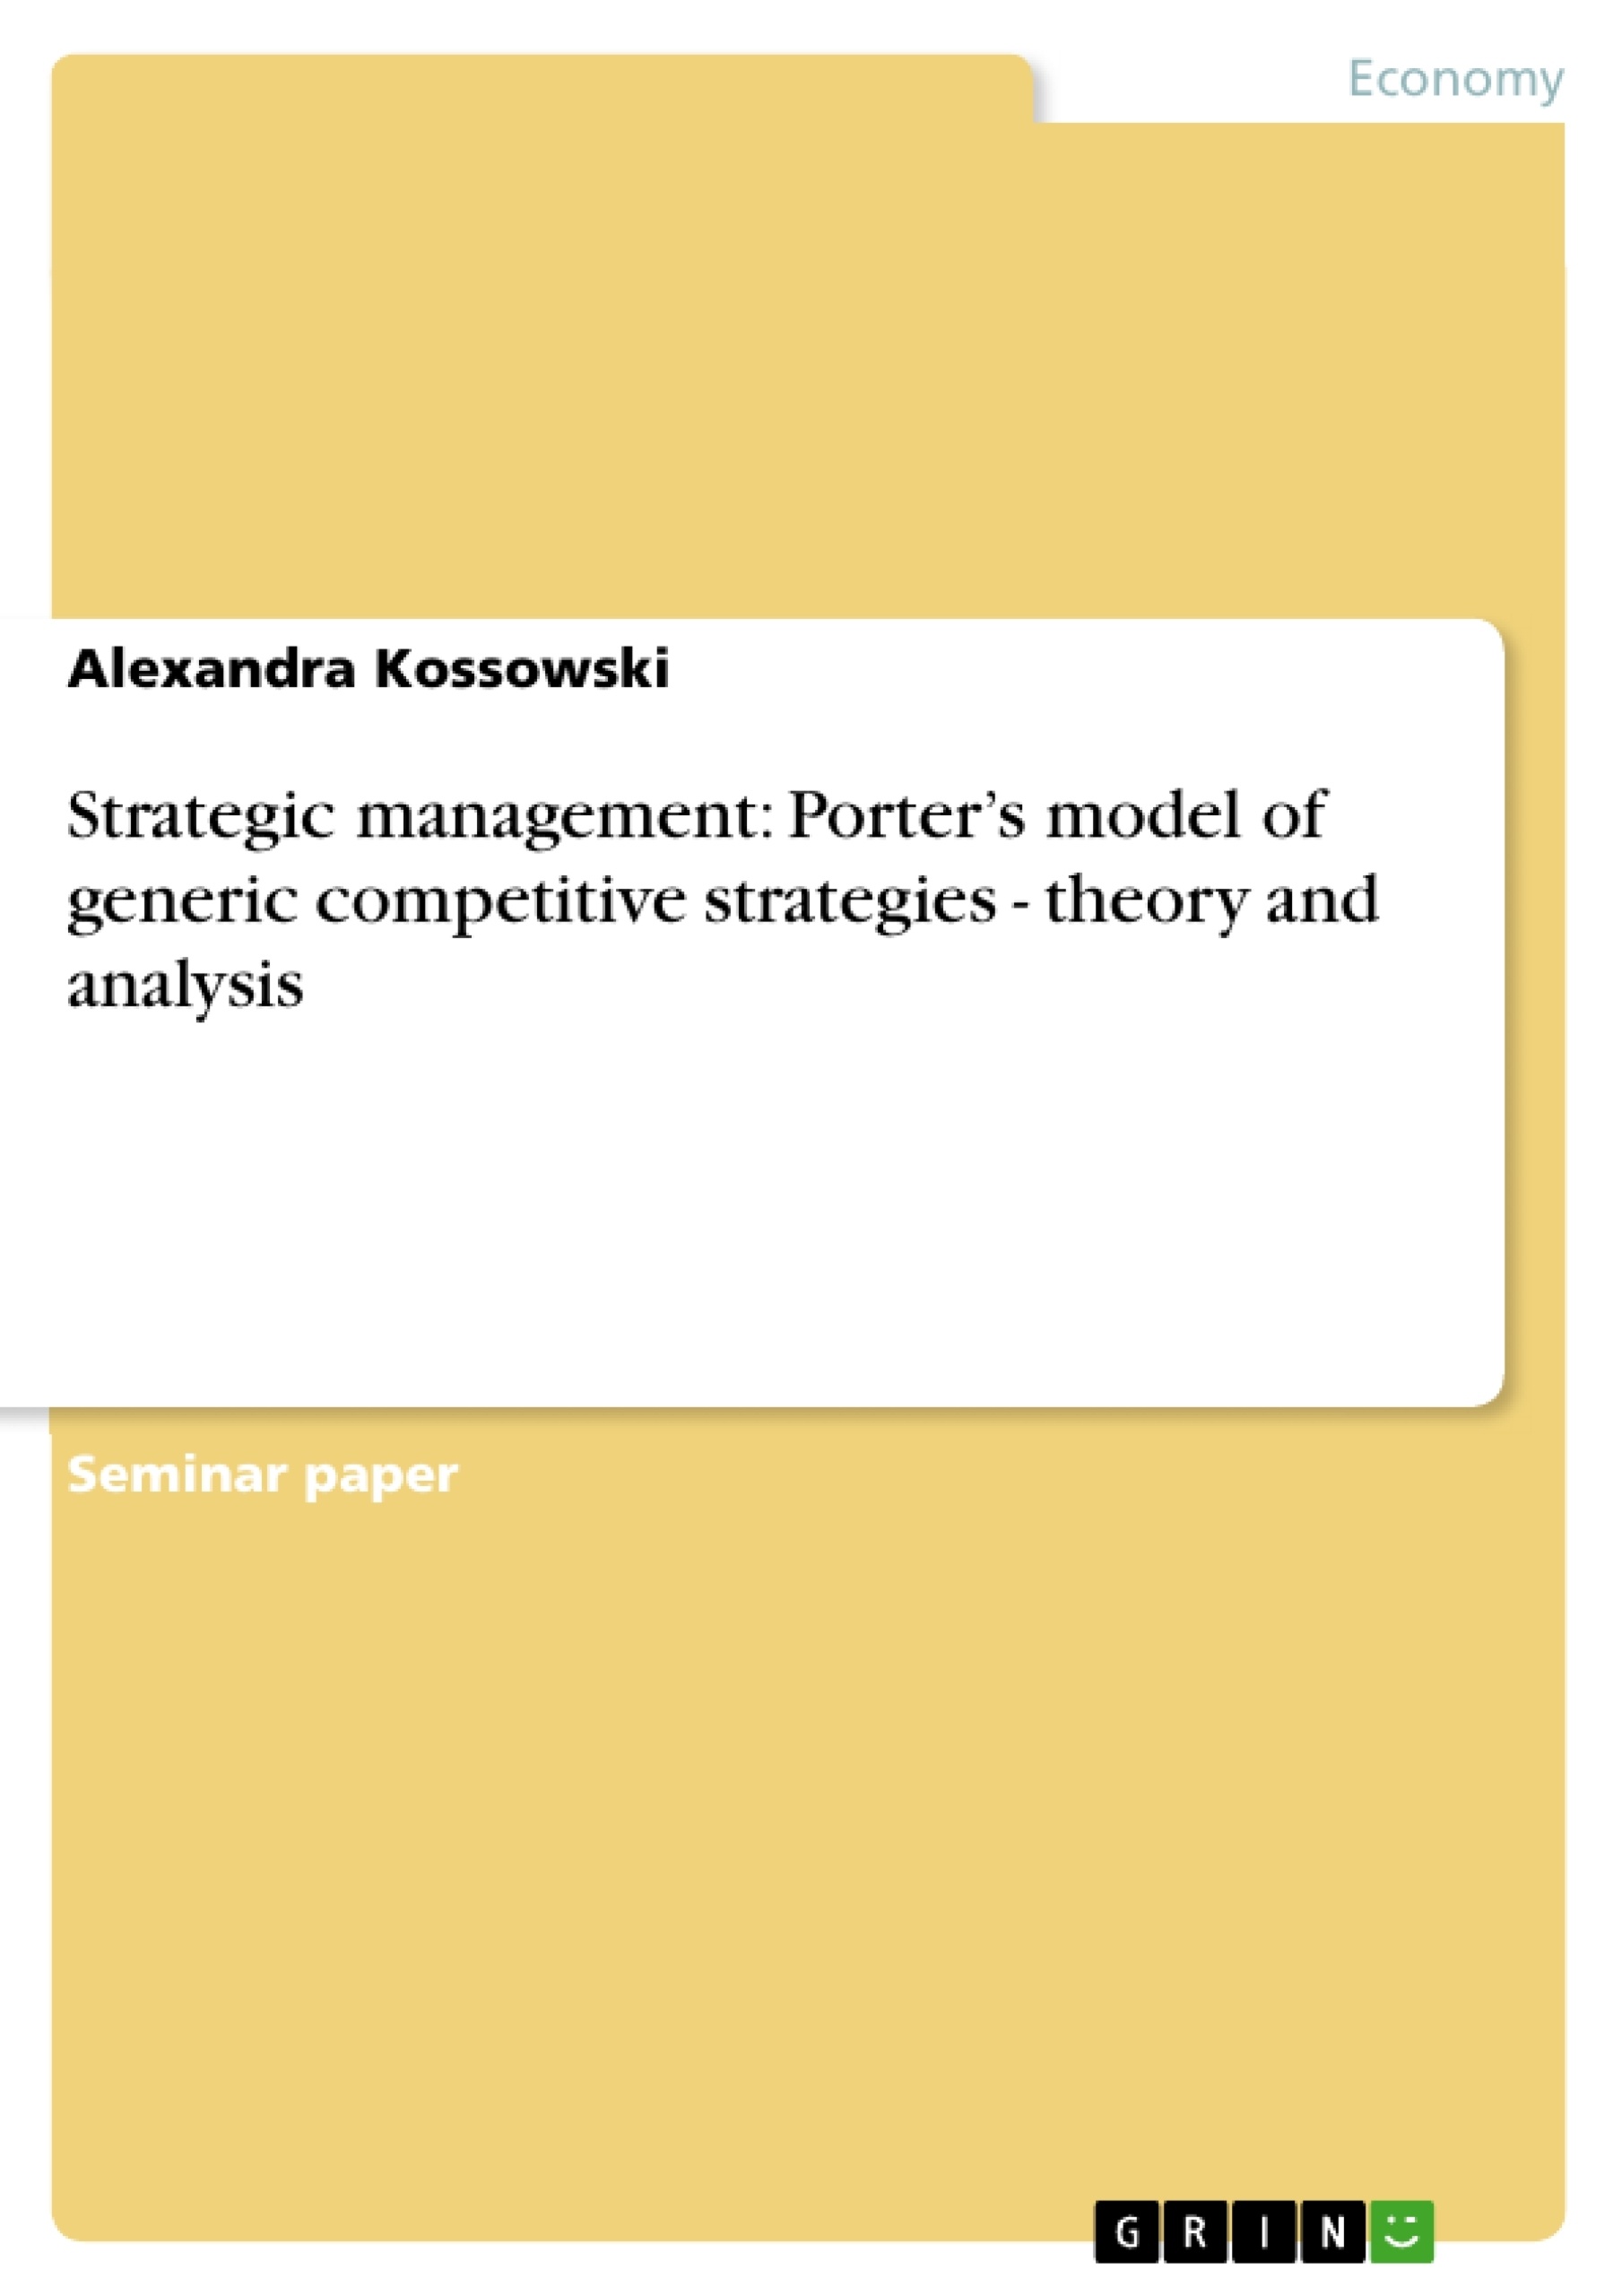 Title: Strategic management: Porter’s model of generic competitive strategies - theory and analysis